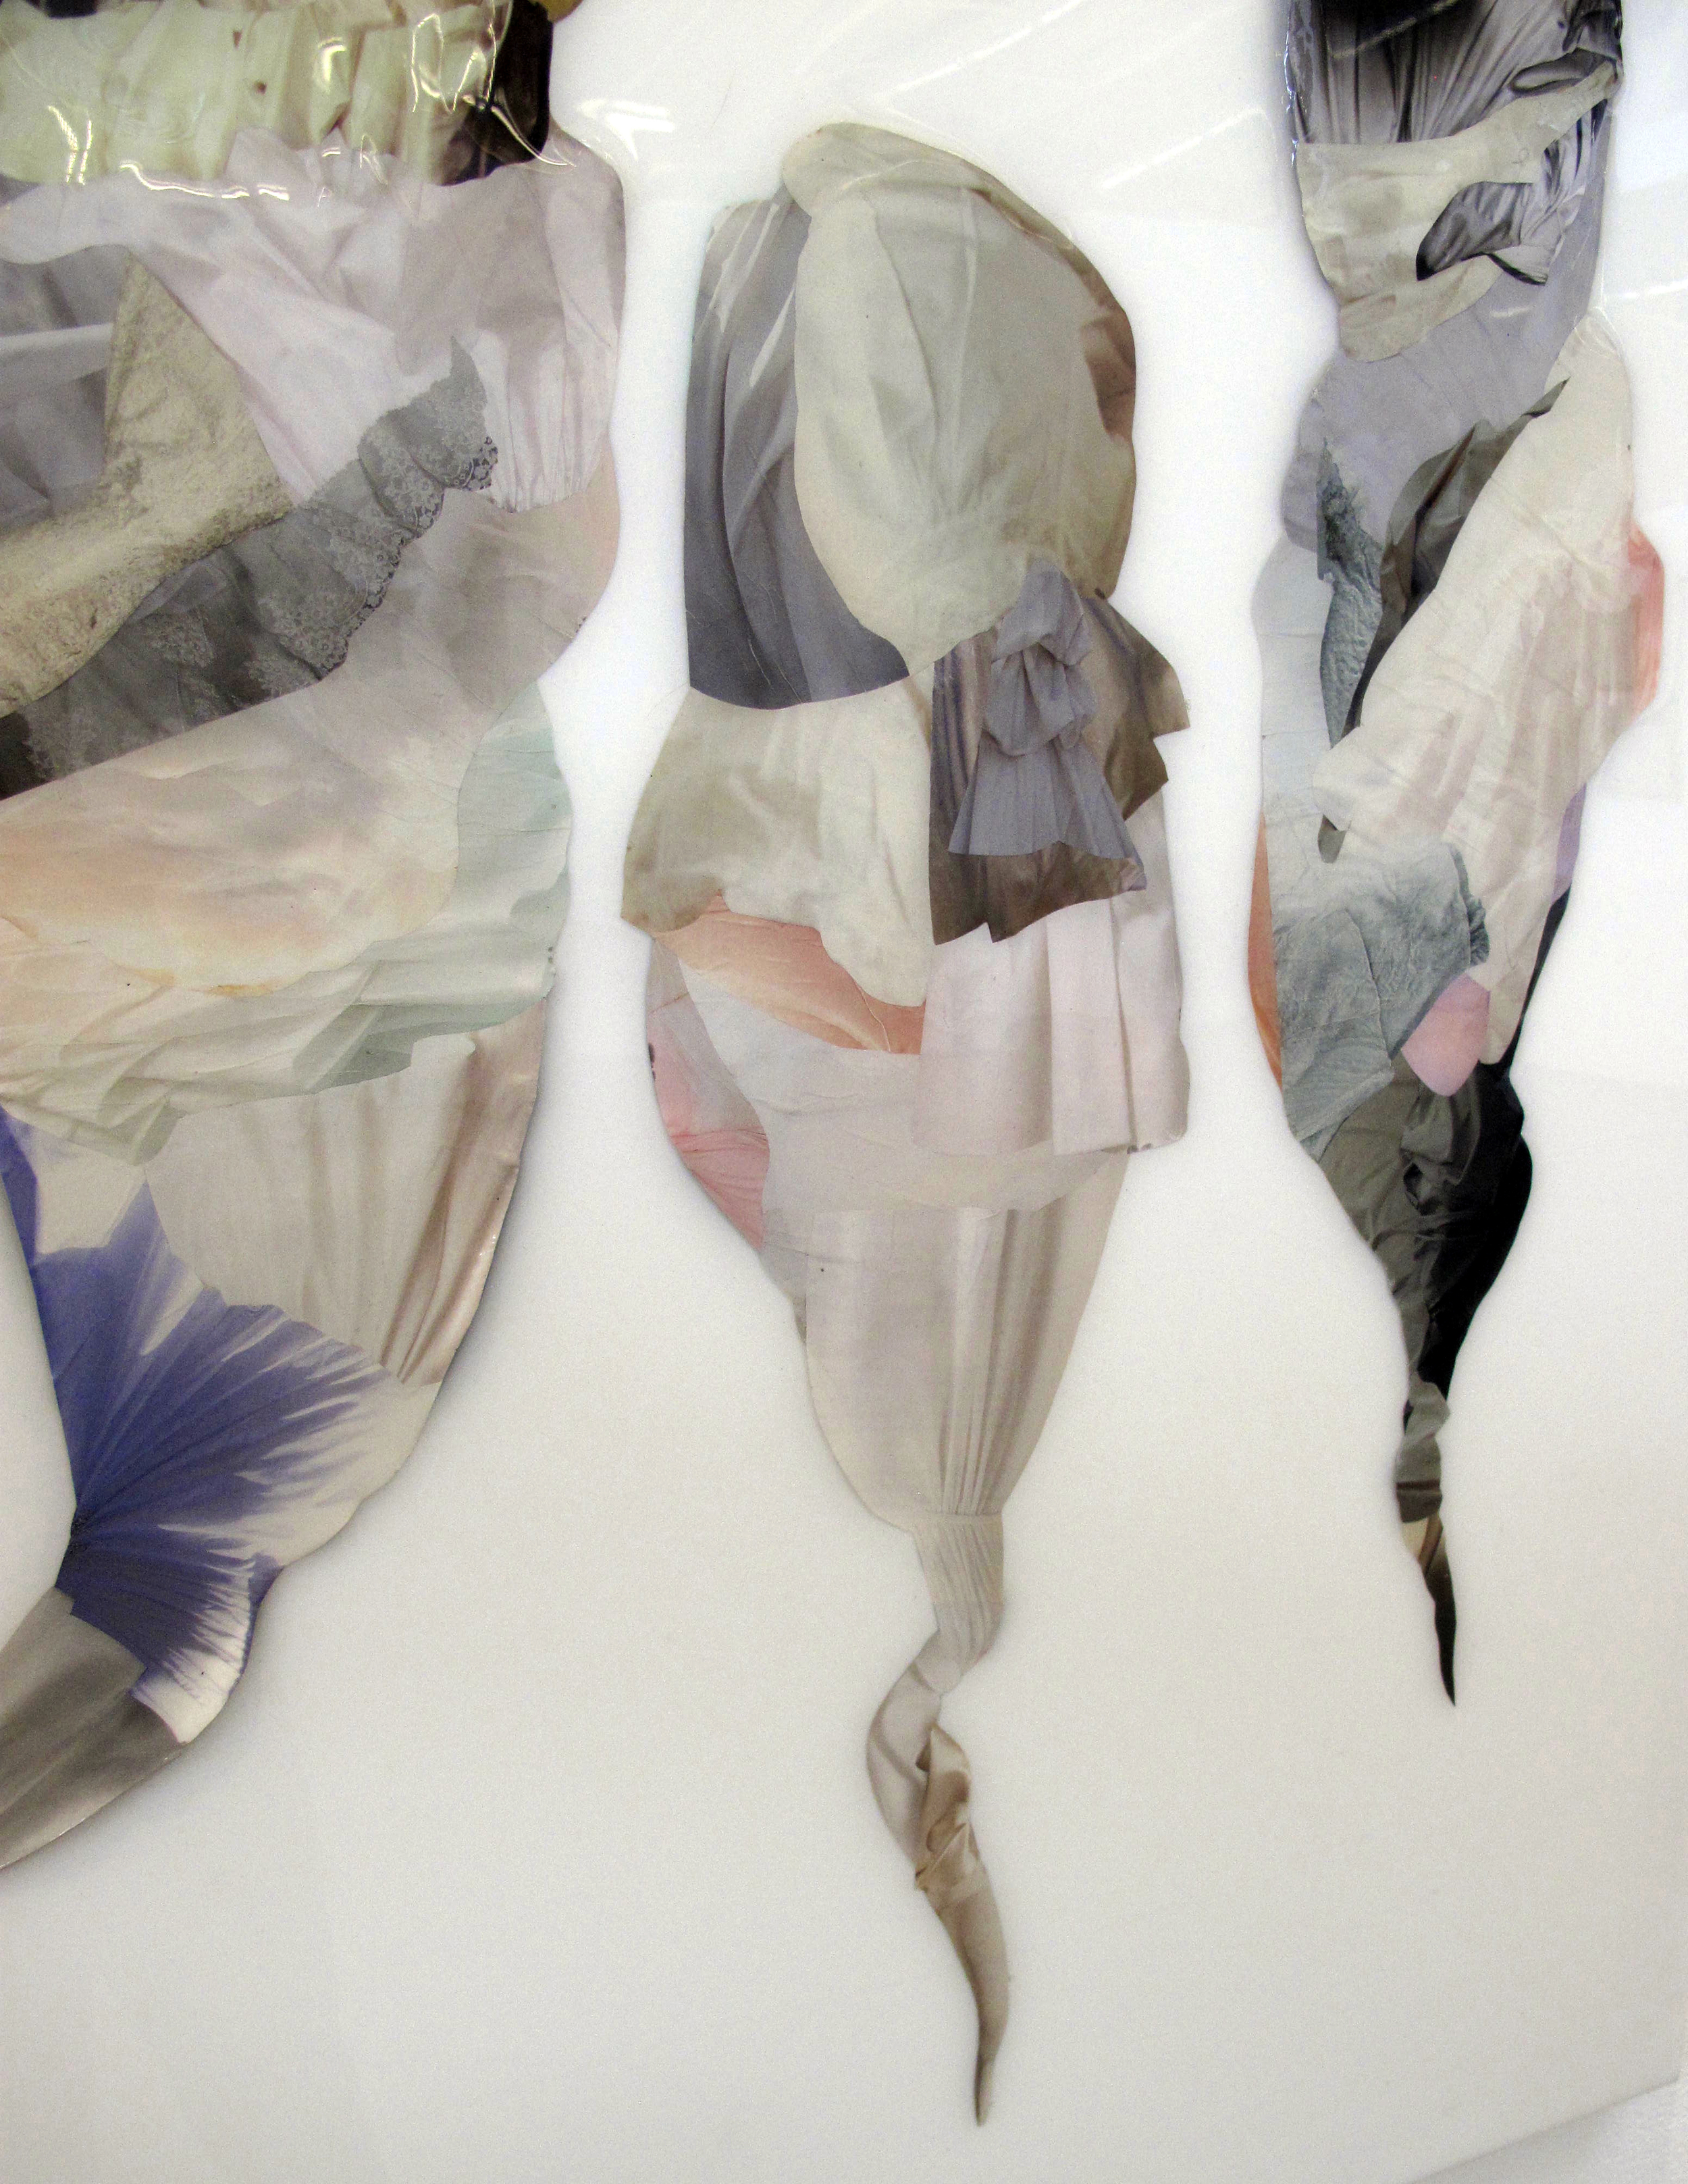   Swaddle (detail) , Hand-cut and assembled found images, photographs, and plastic resin. &nbsp;36 X 72" 